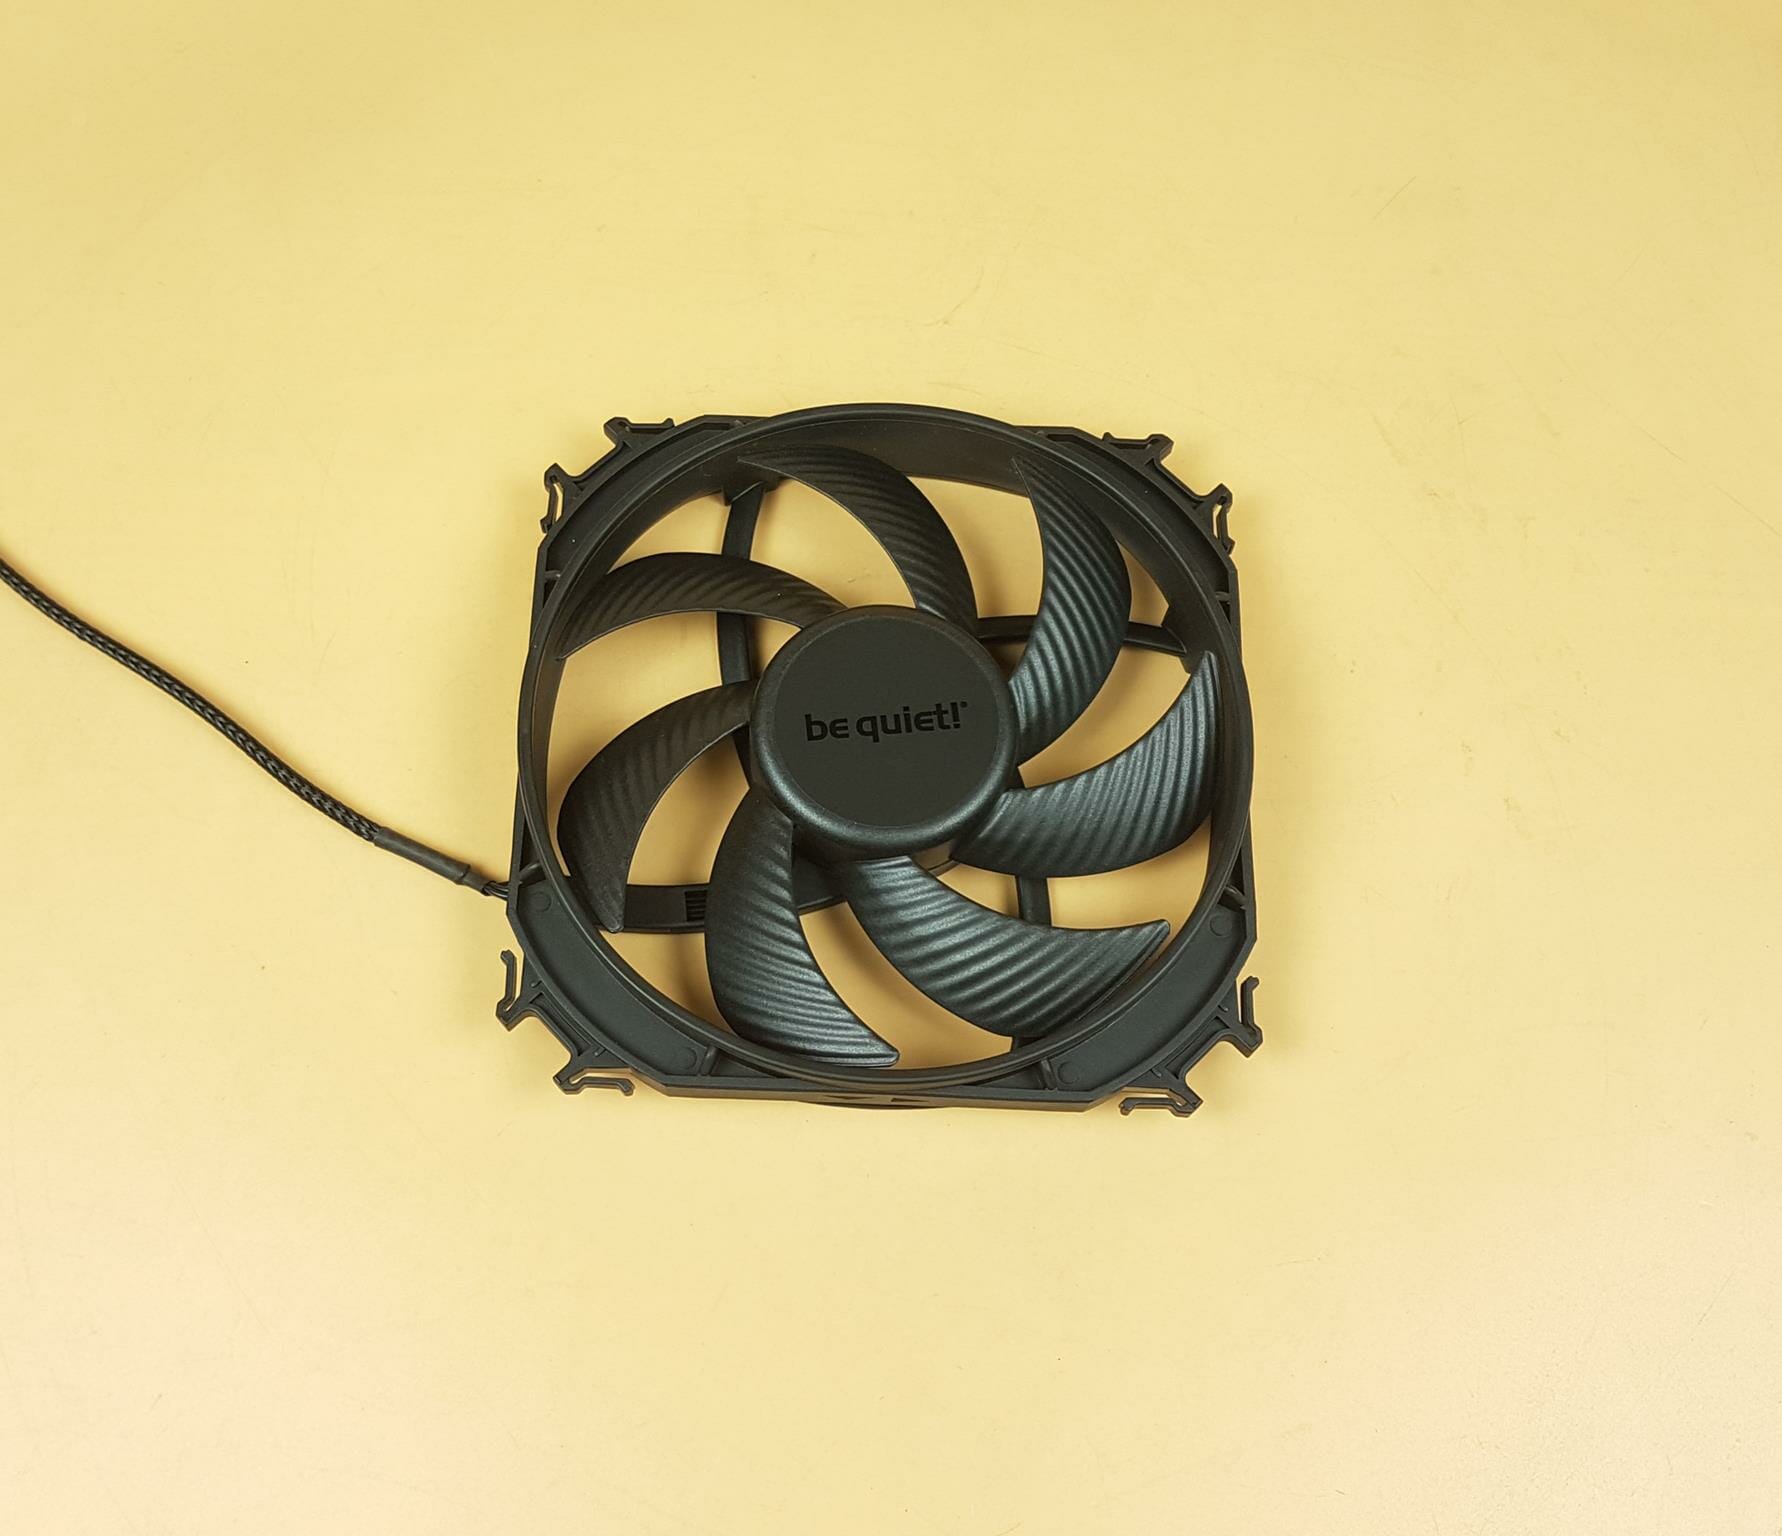 be quiet! Silent Wings PWM High-Speed 140mm Fans 4 Review